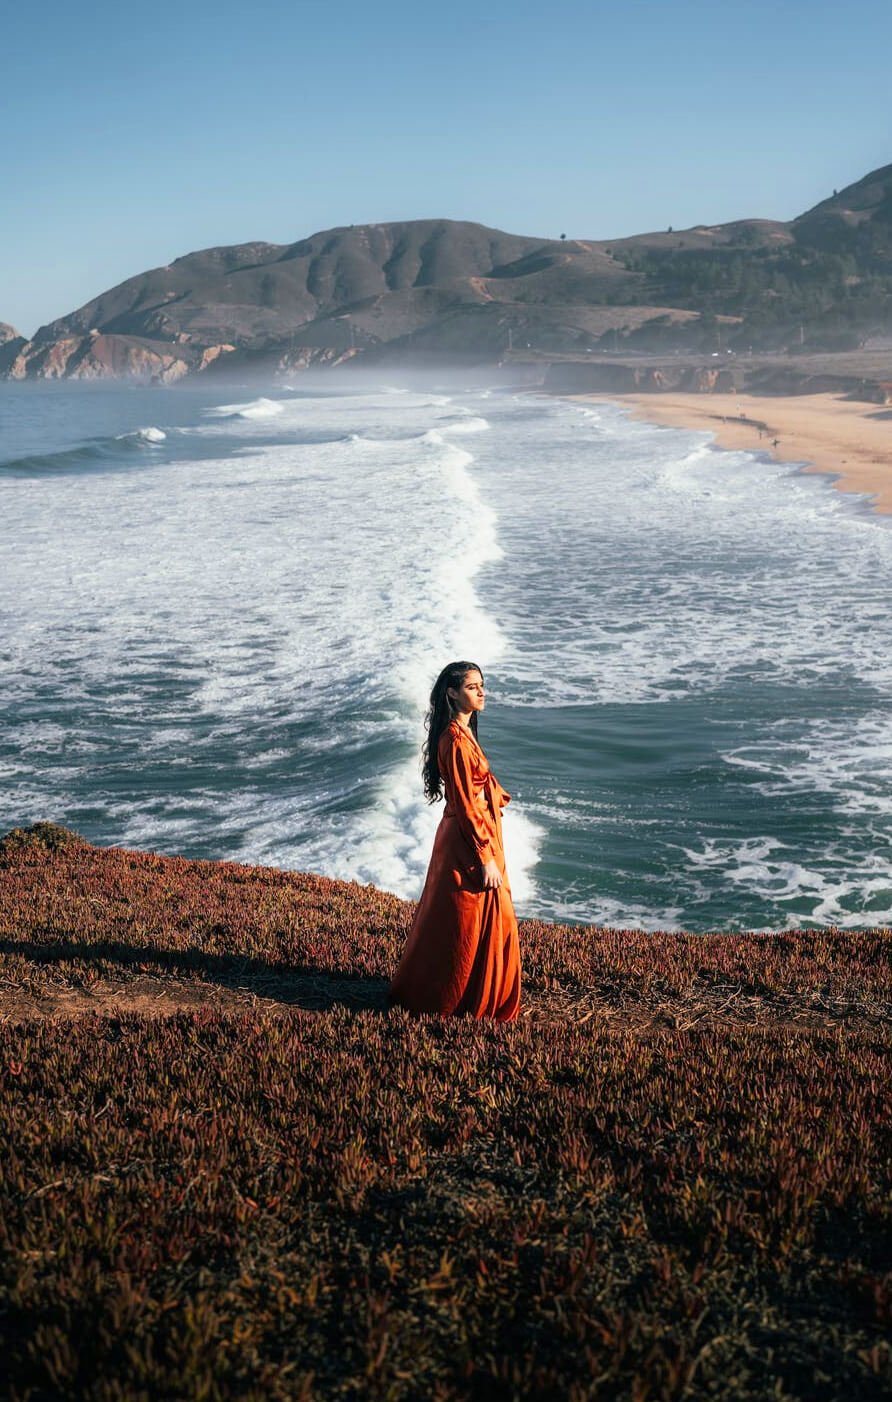 a person in a red dress on a beach